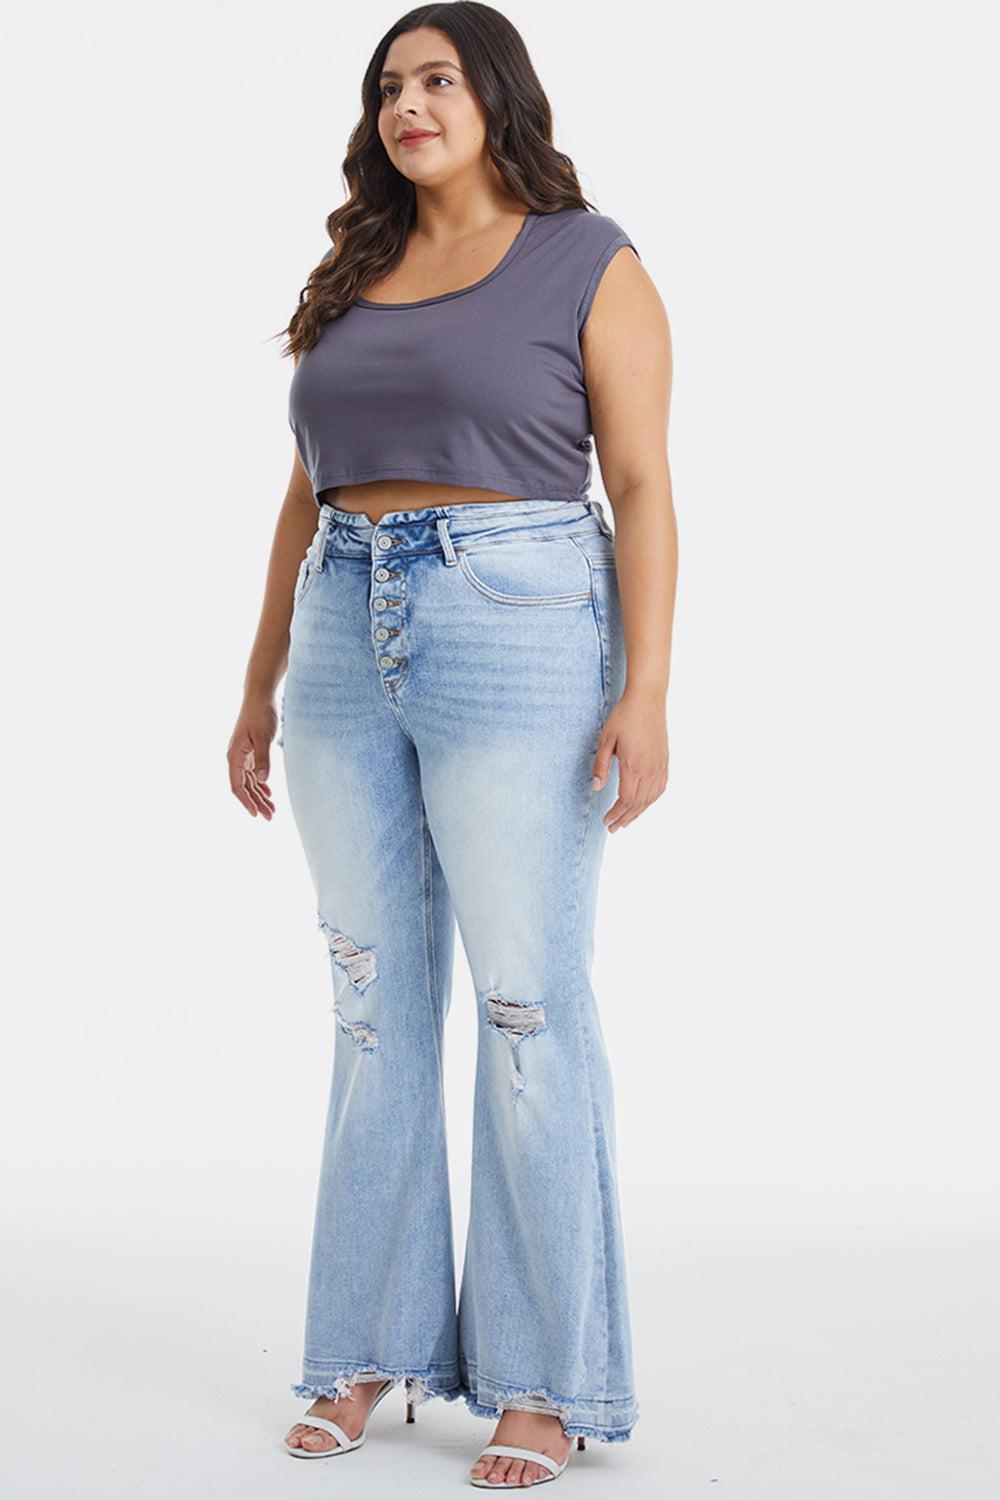 a woman in a cropped top and jeans